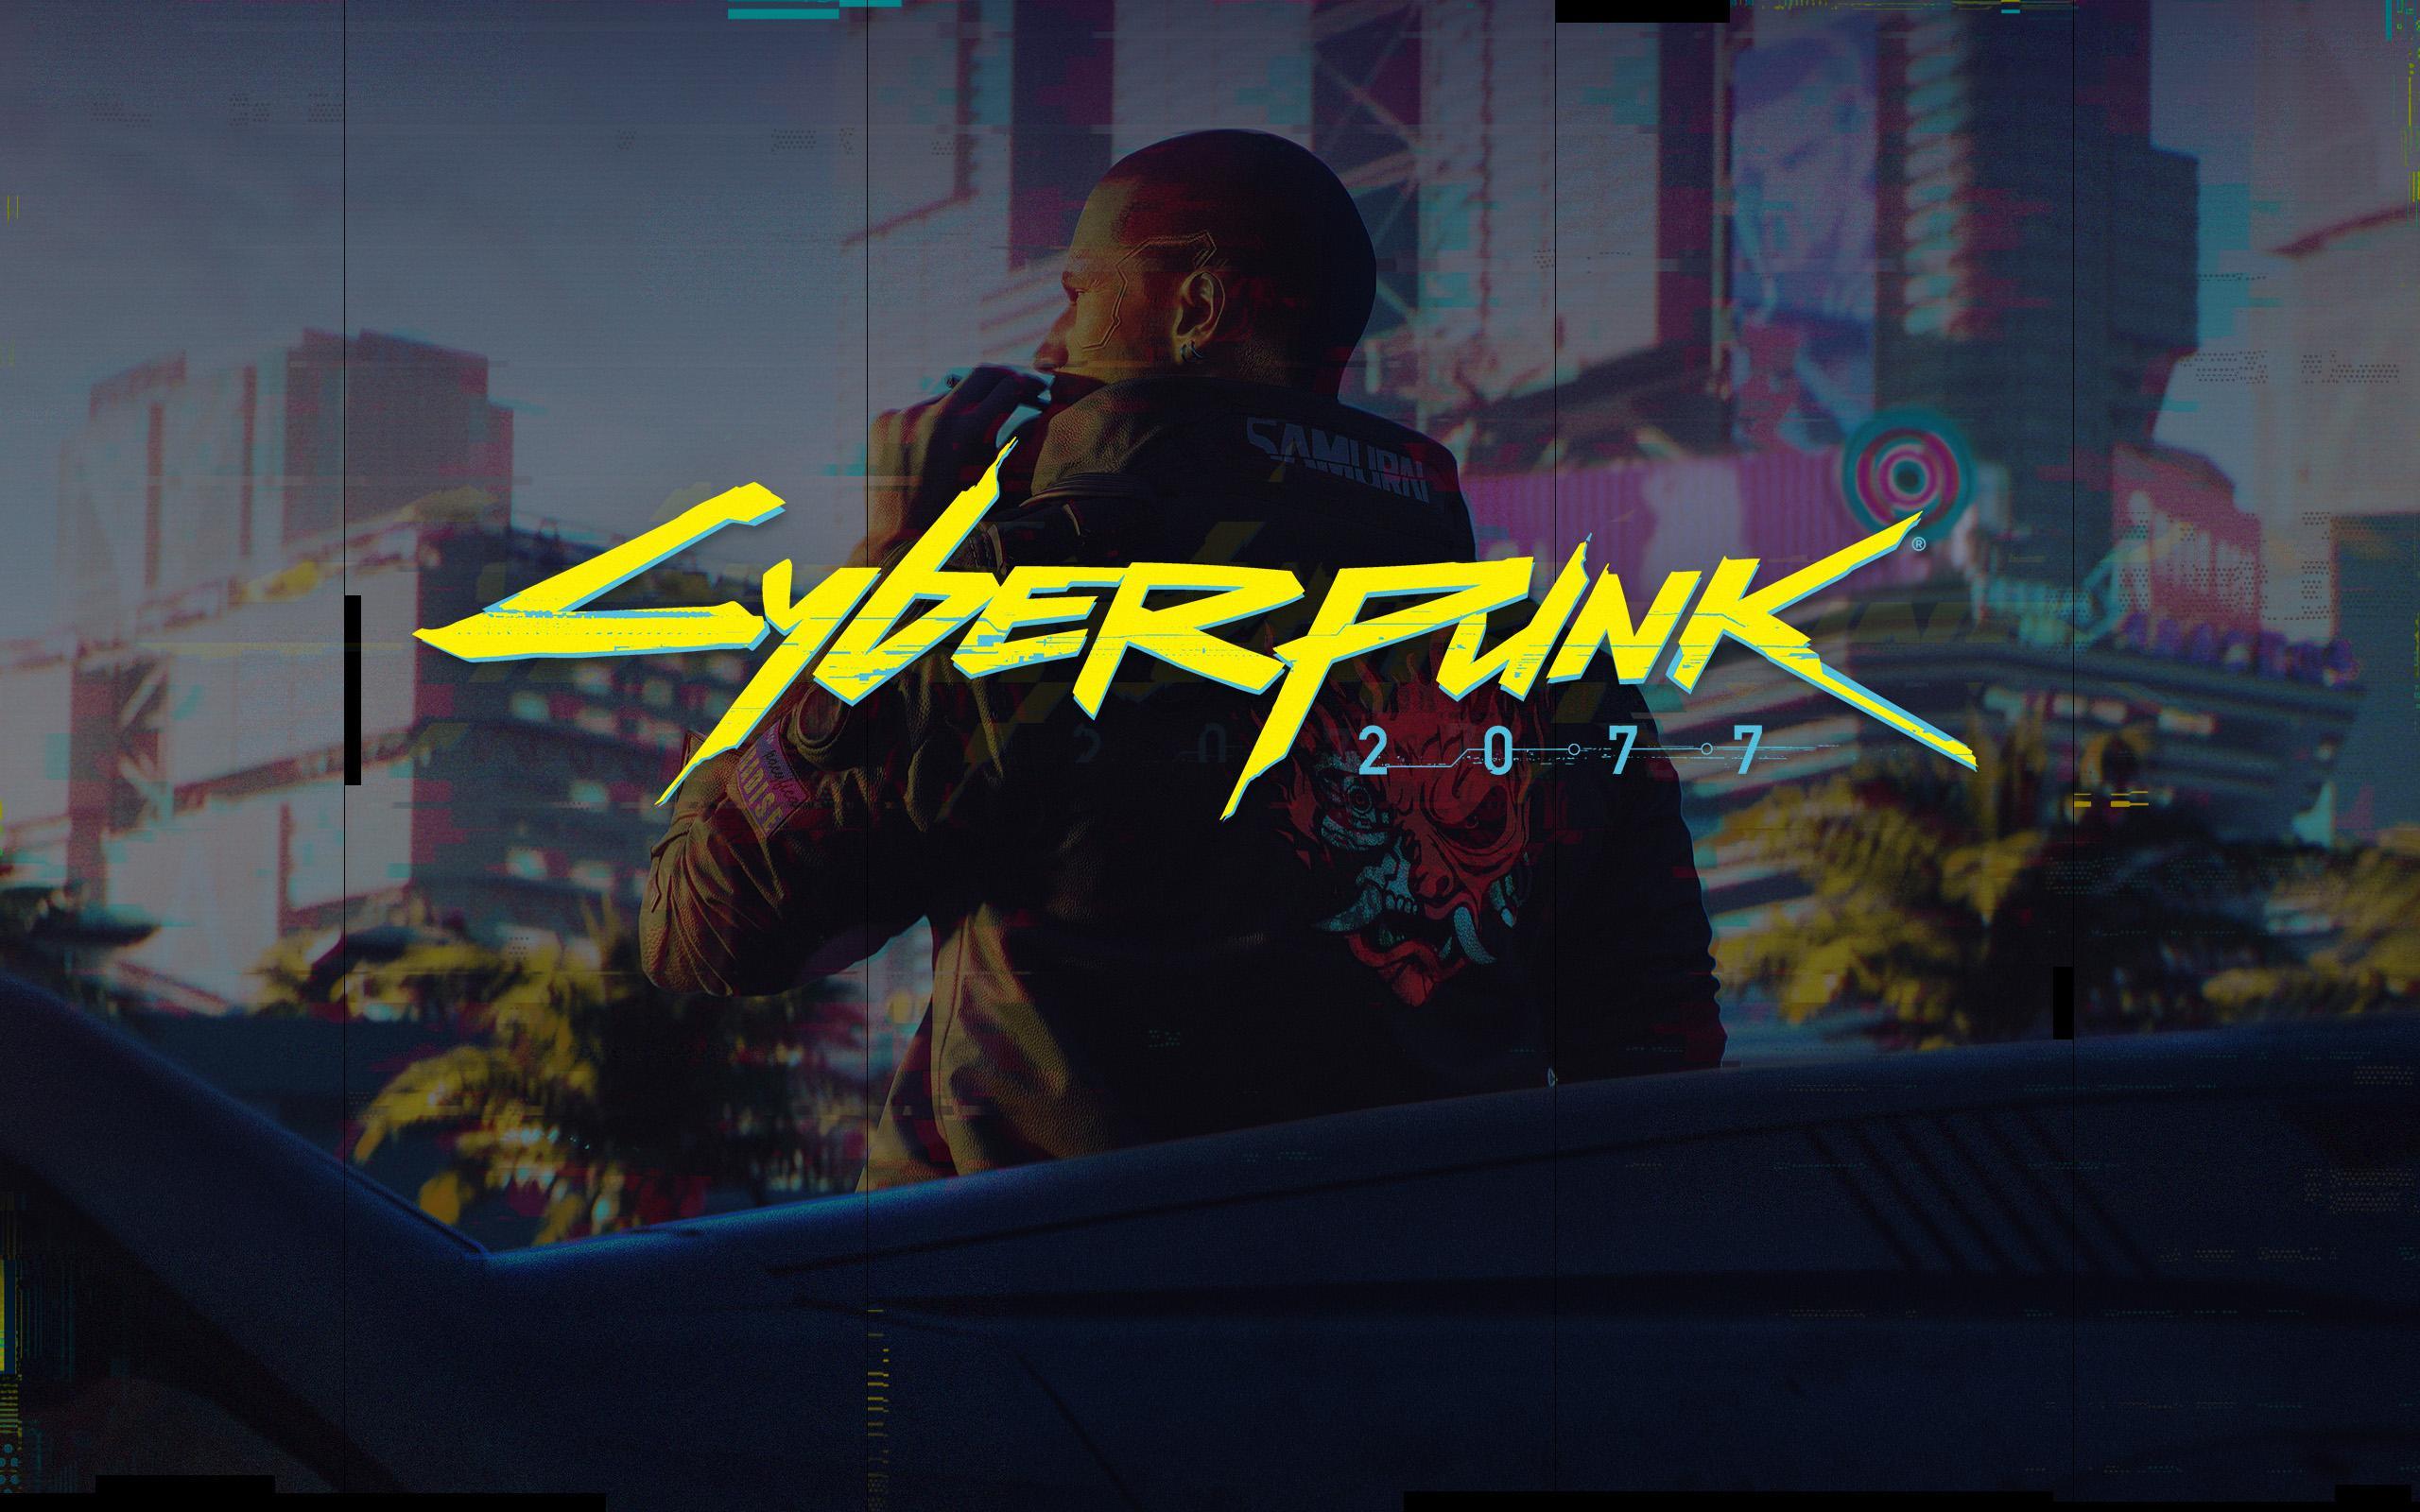 Cyberpunk 2077 wallpaper 4k for Android